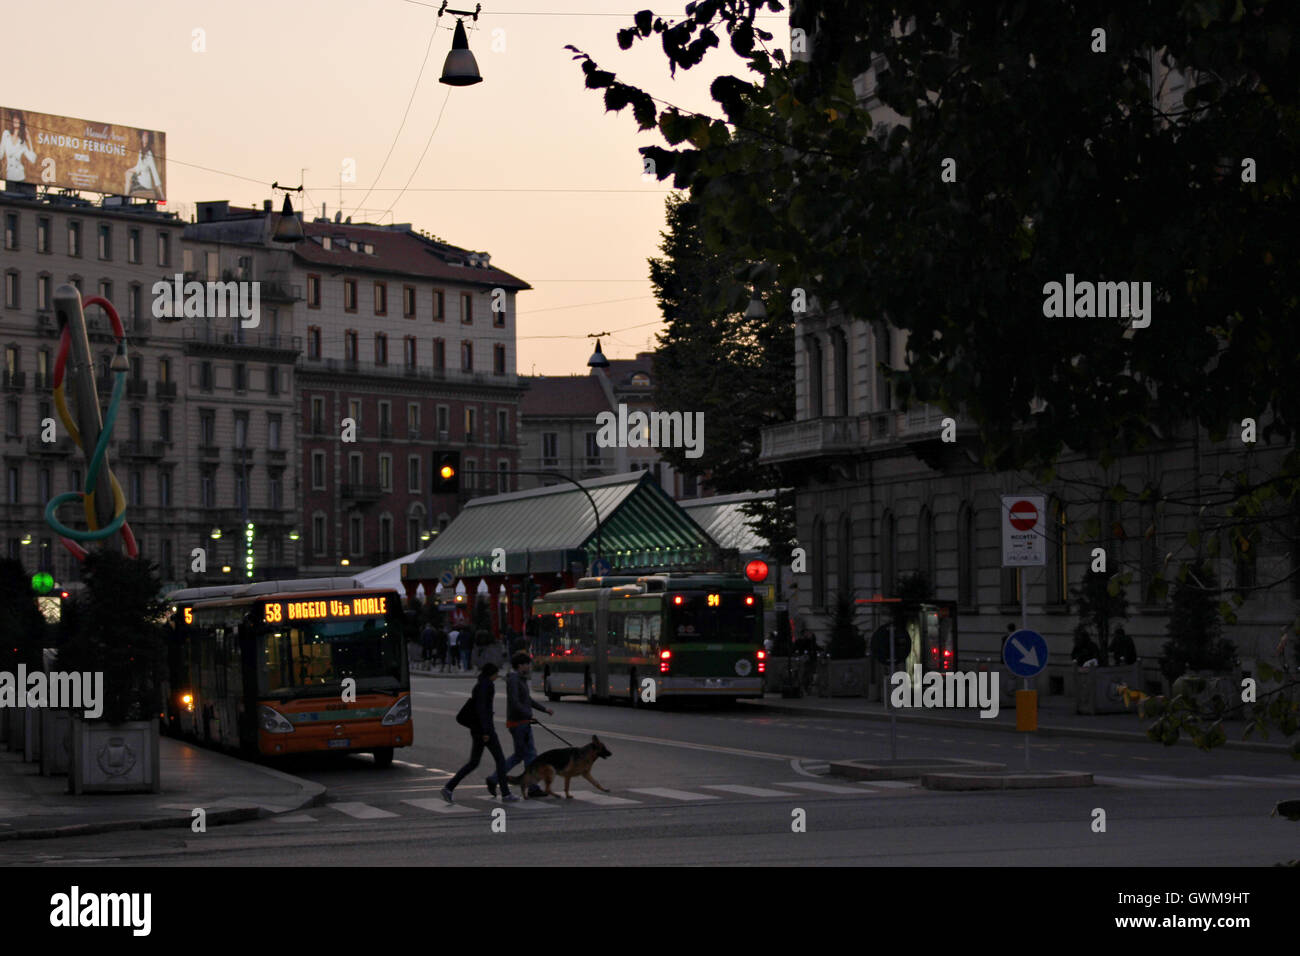 a beautiful picture of a buses at bus stops near Cadorna station at dusk, Milan, Italy Stock Photo